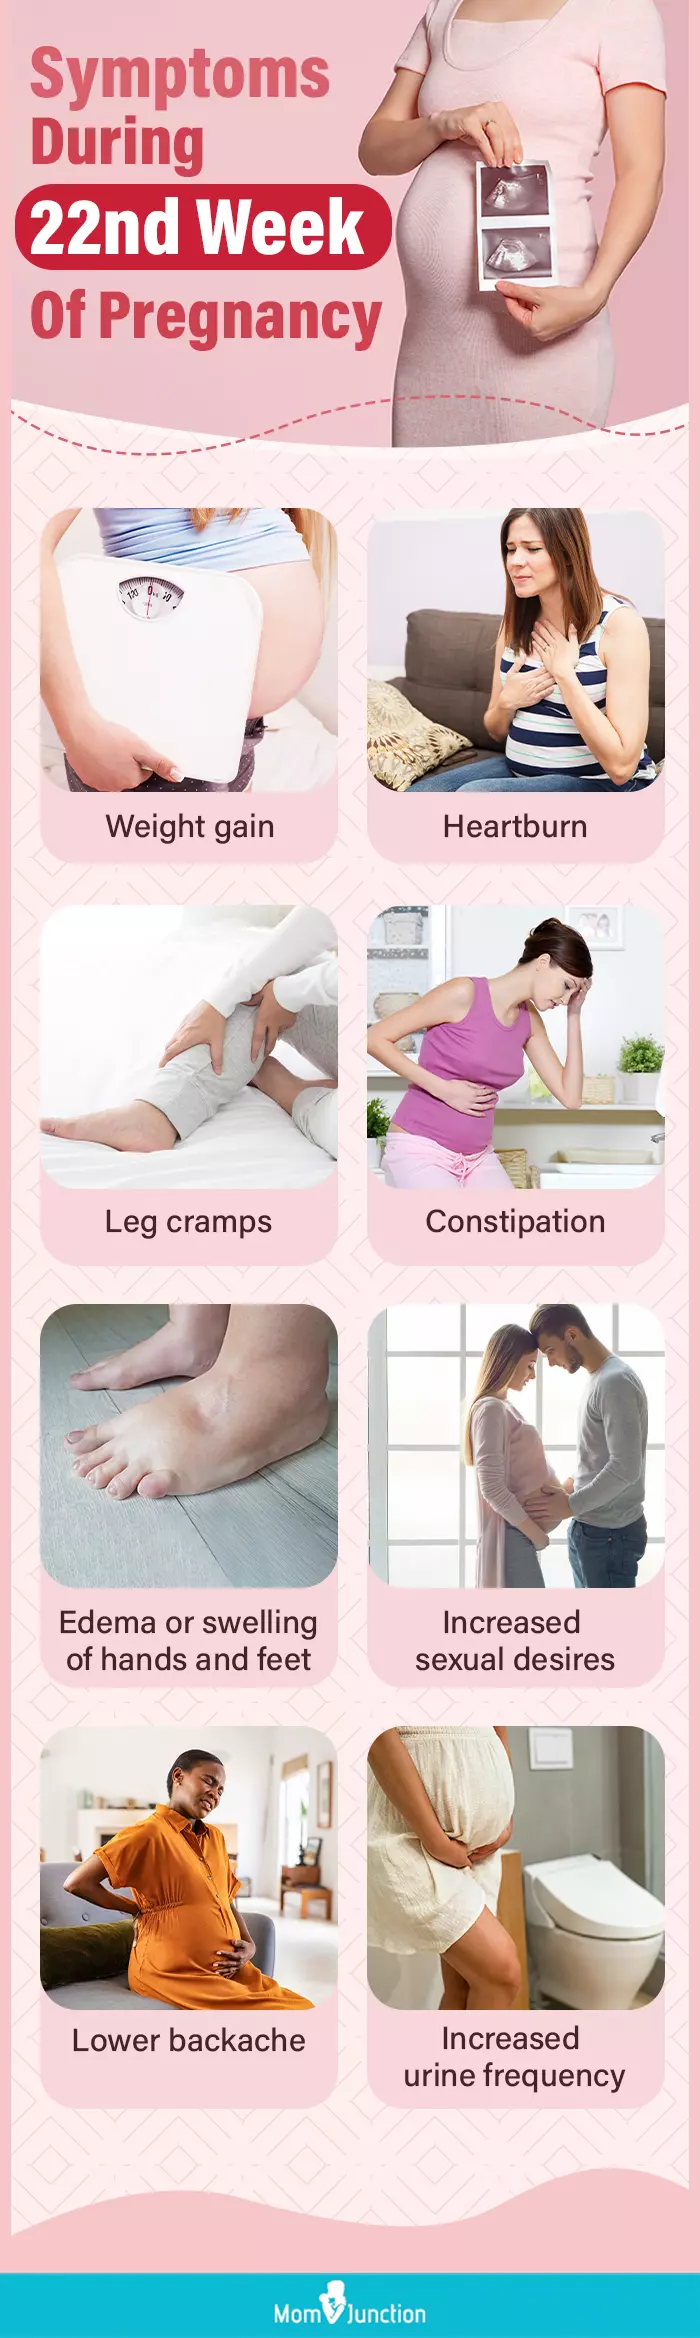 symptoms during 22nd week of pregnancy (infographic)